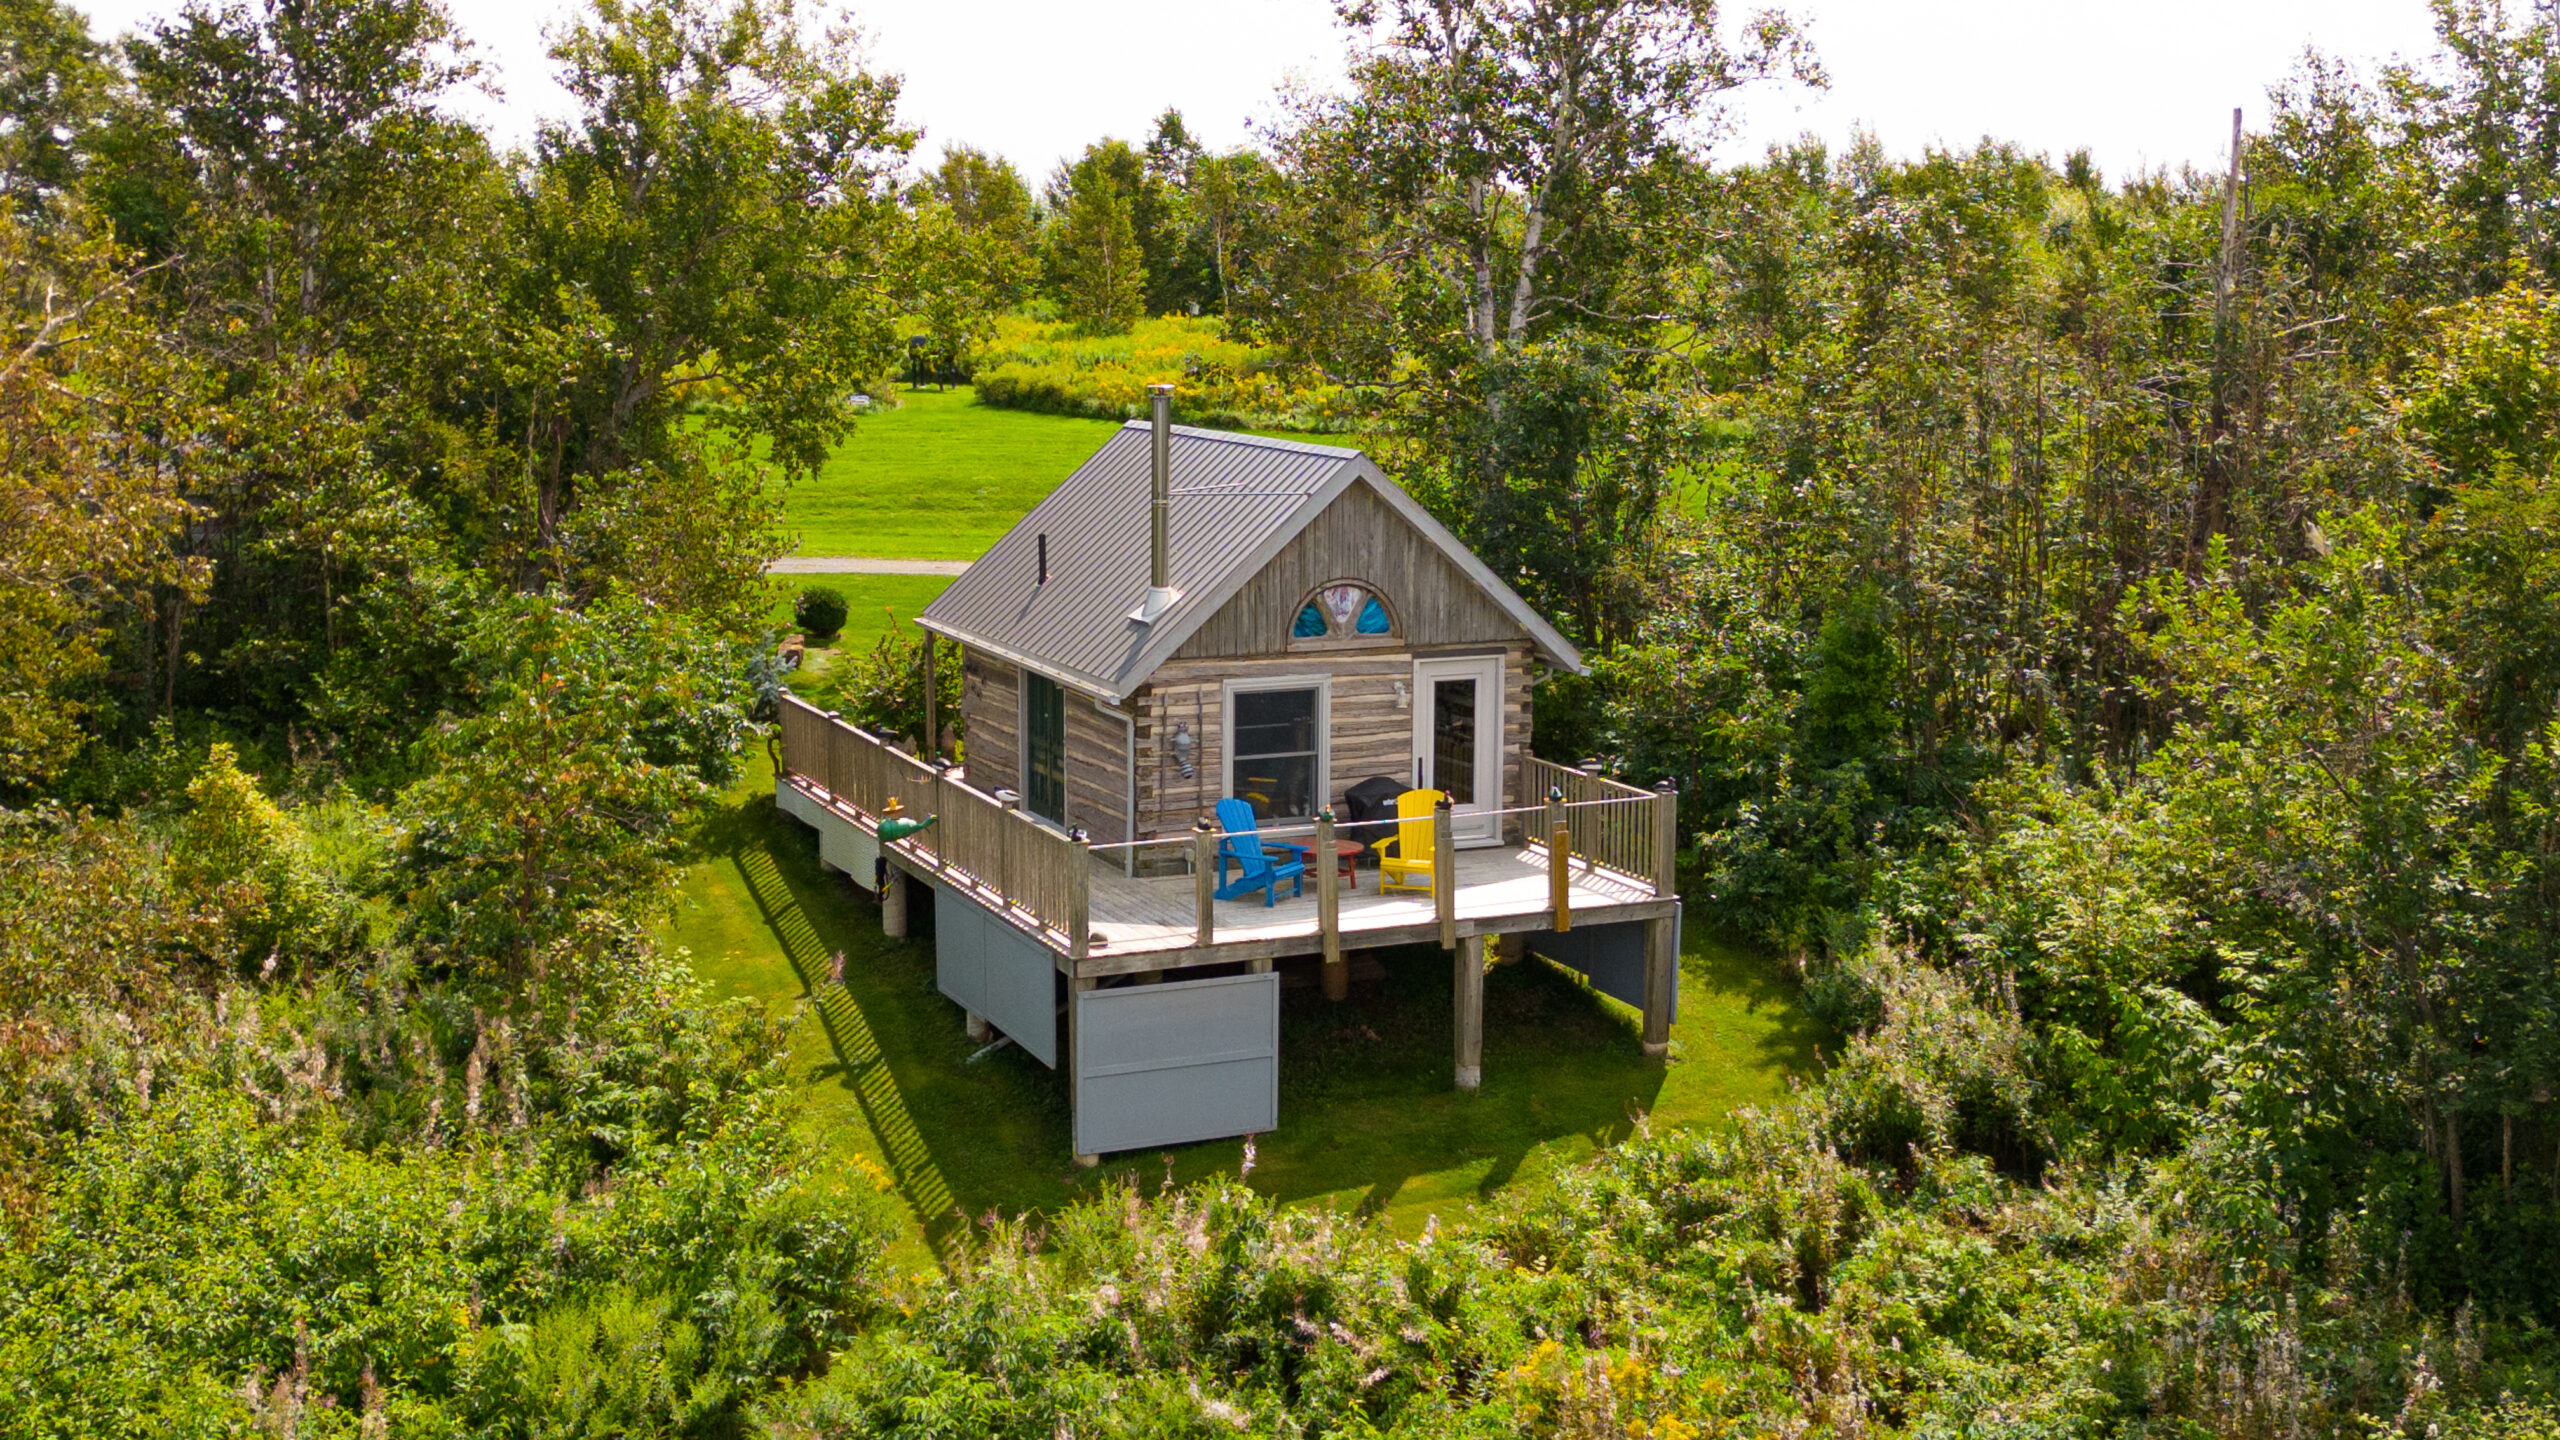 A small log cabin with a modern wrap-around deck, which holds two Muskoka-style chairs.